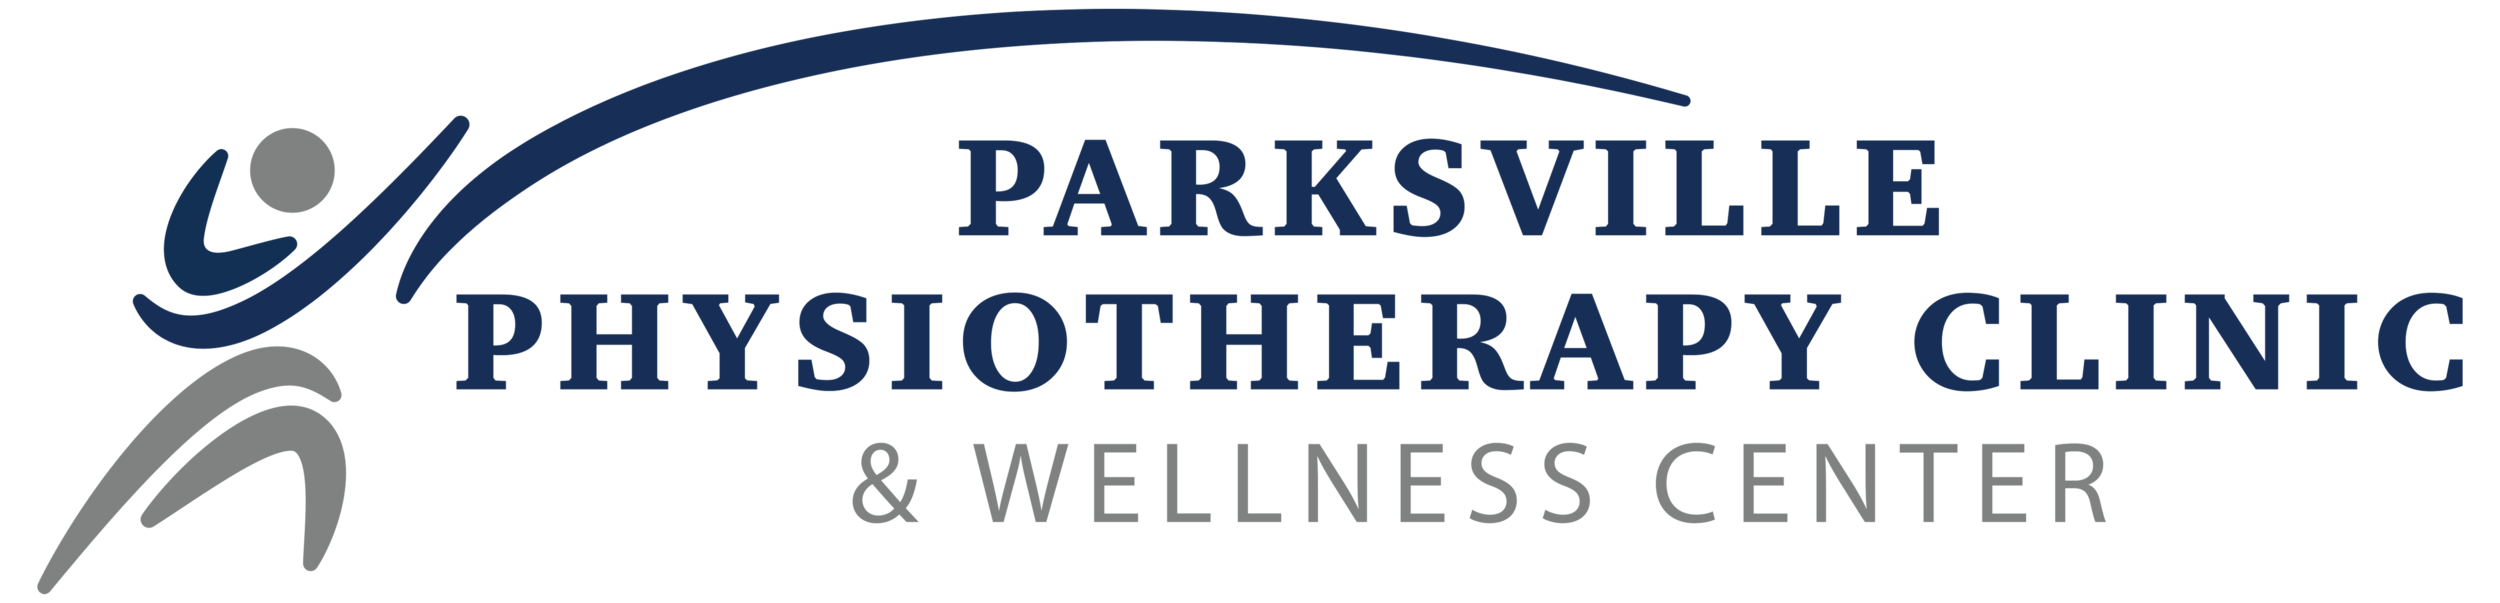 Parksville Physiotherapy Clinic